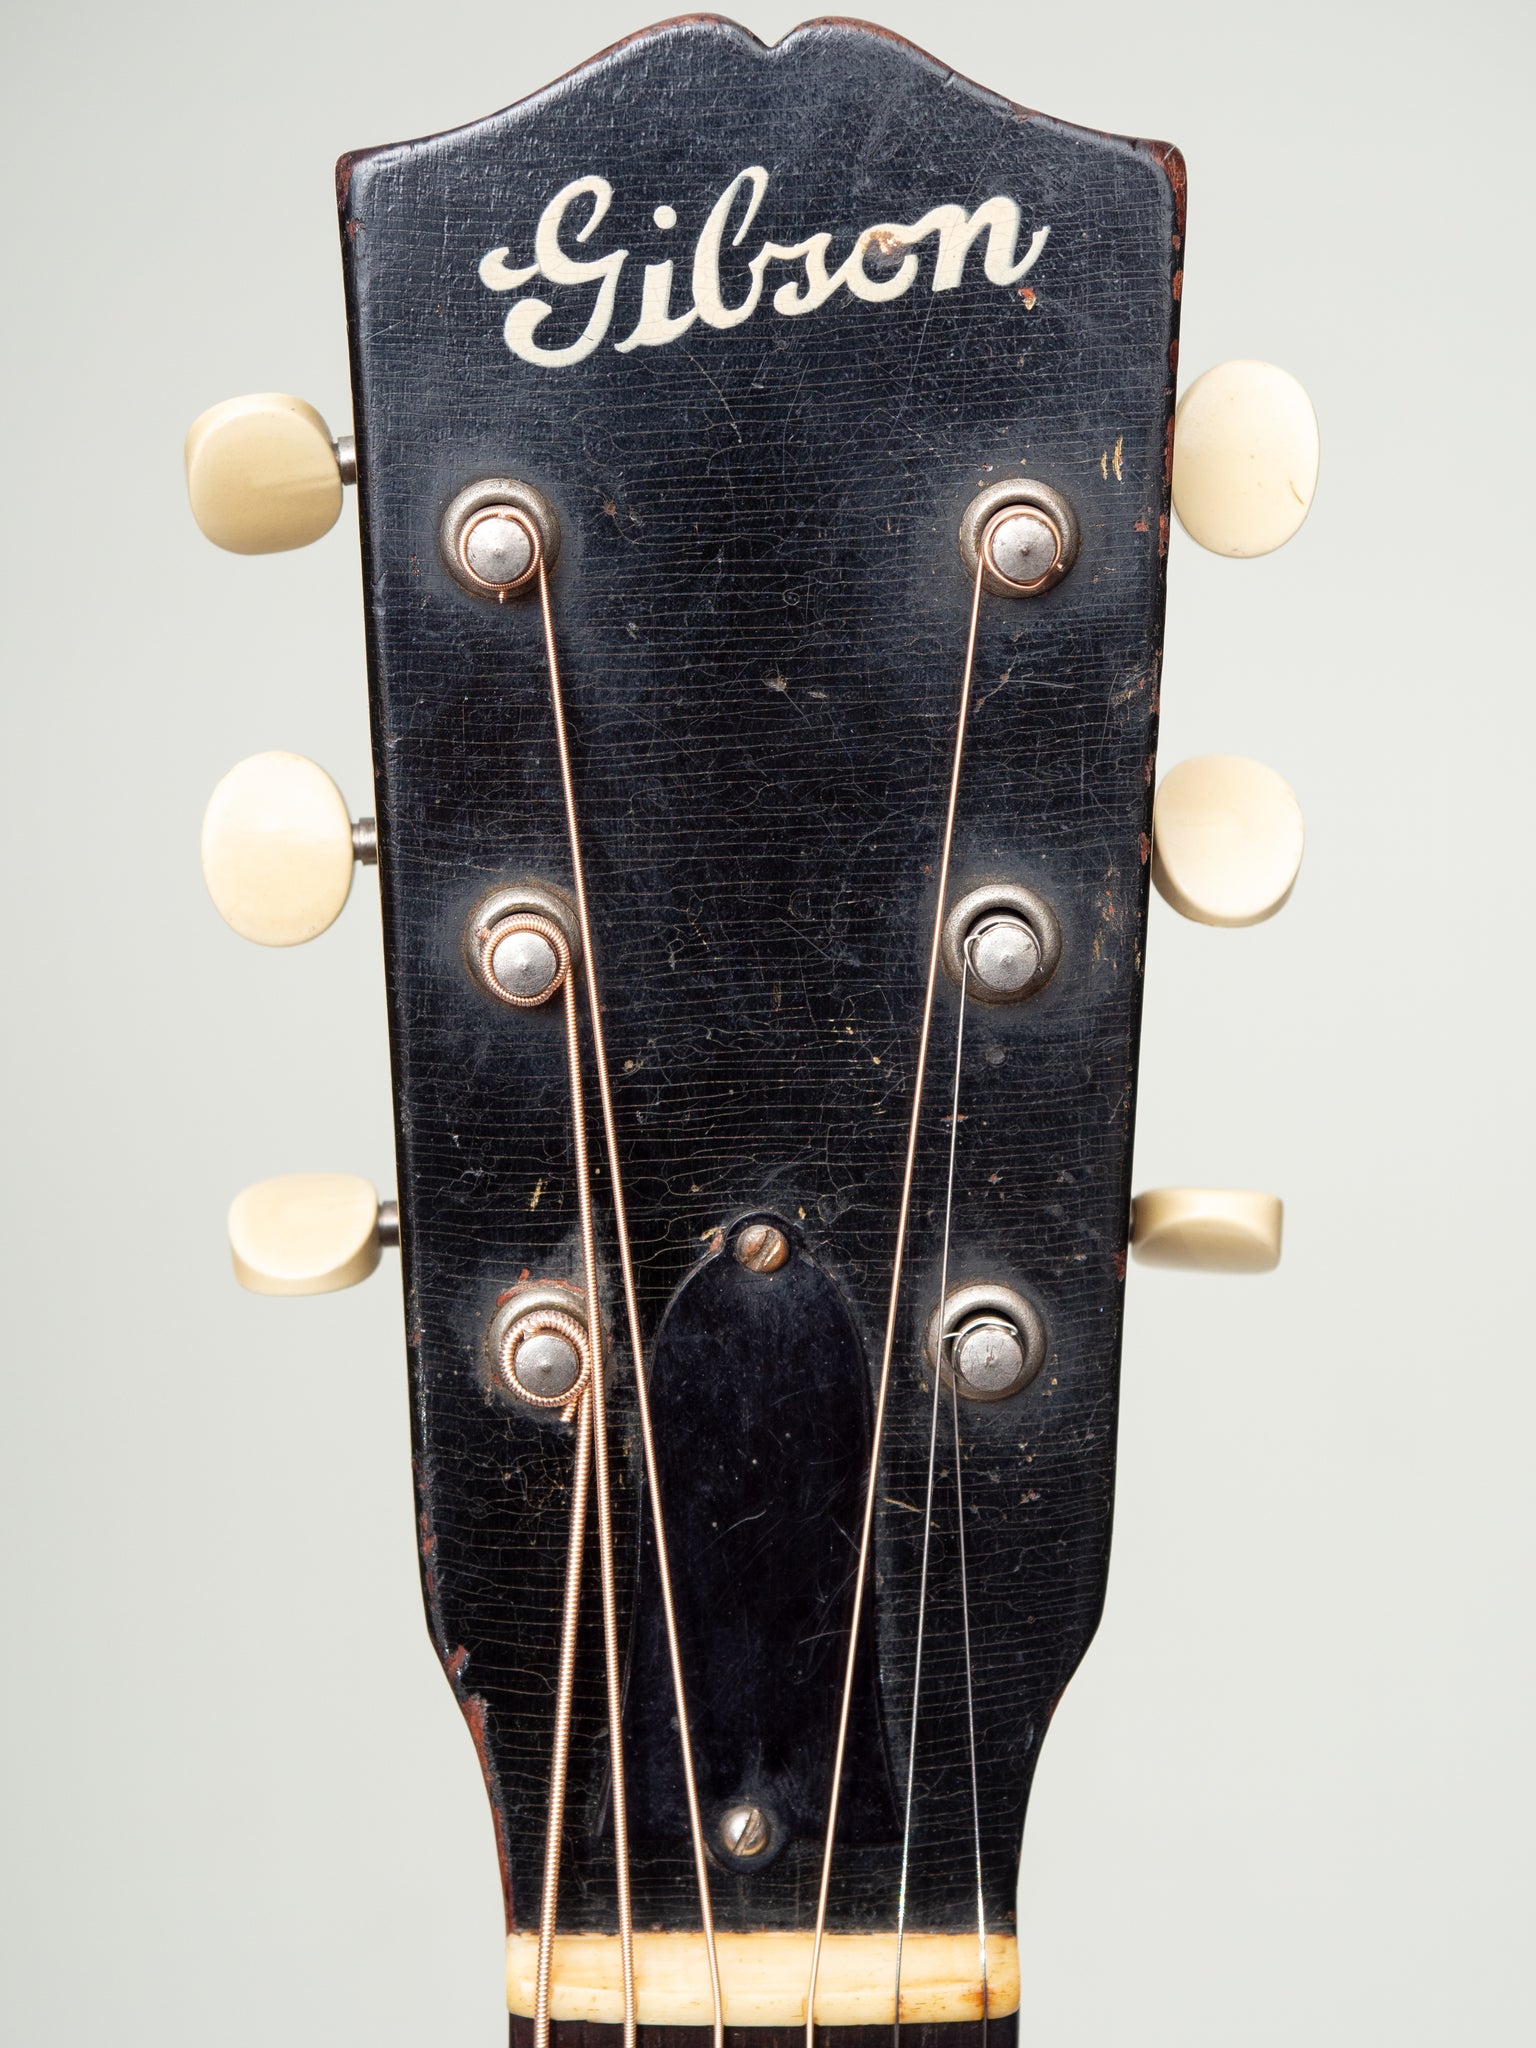 1935 Gibson L-30